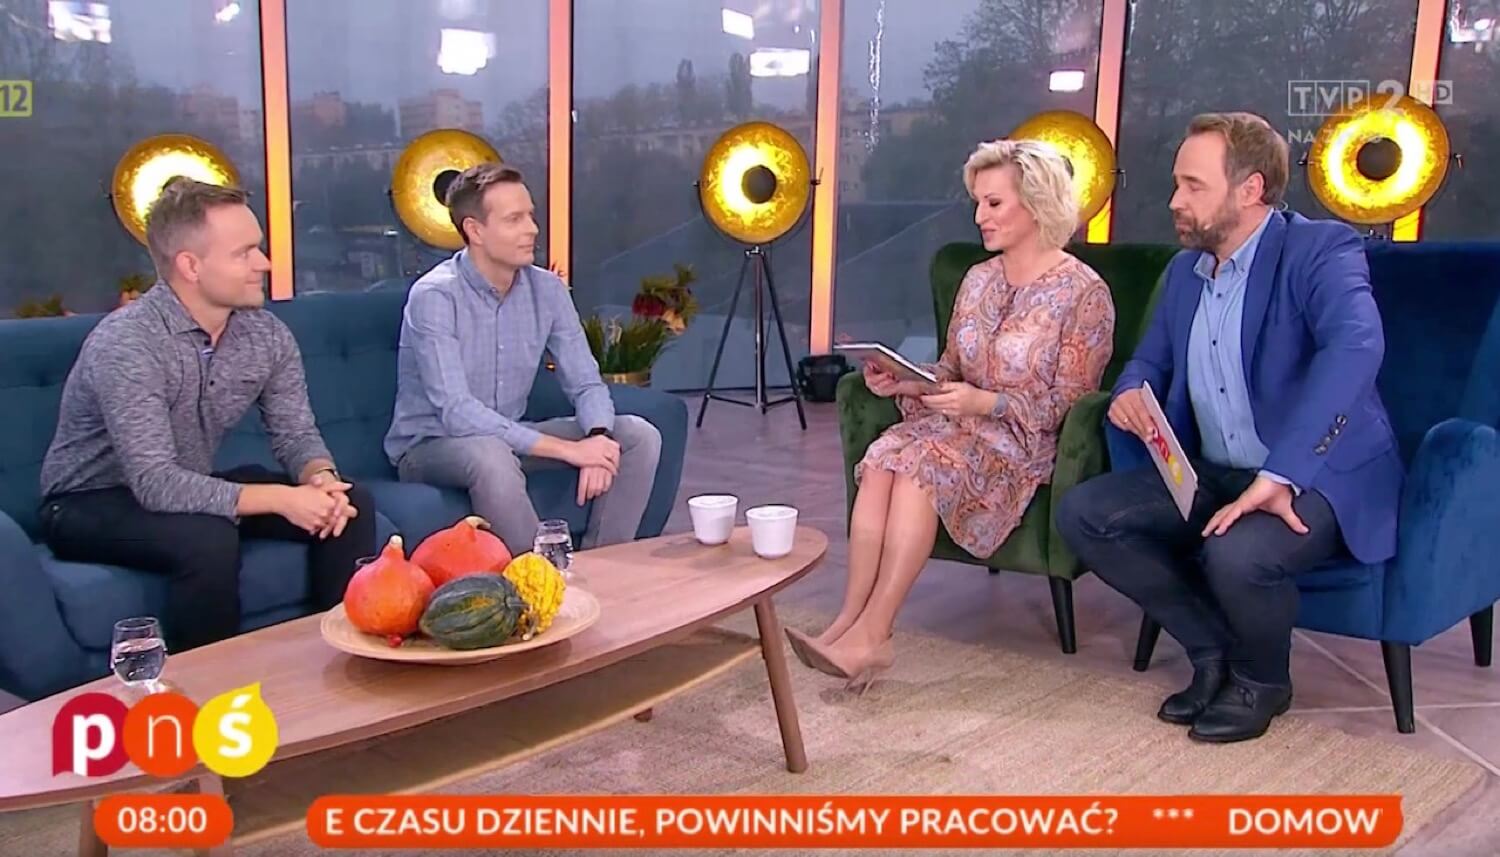 TV appearance! Nozbe’s TGIF - Thank Goodness It’s Friday on Polish national television - how to work smarter?